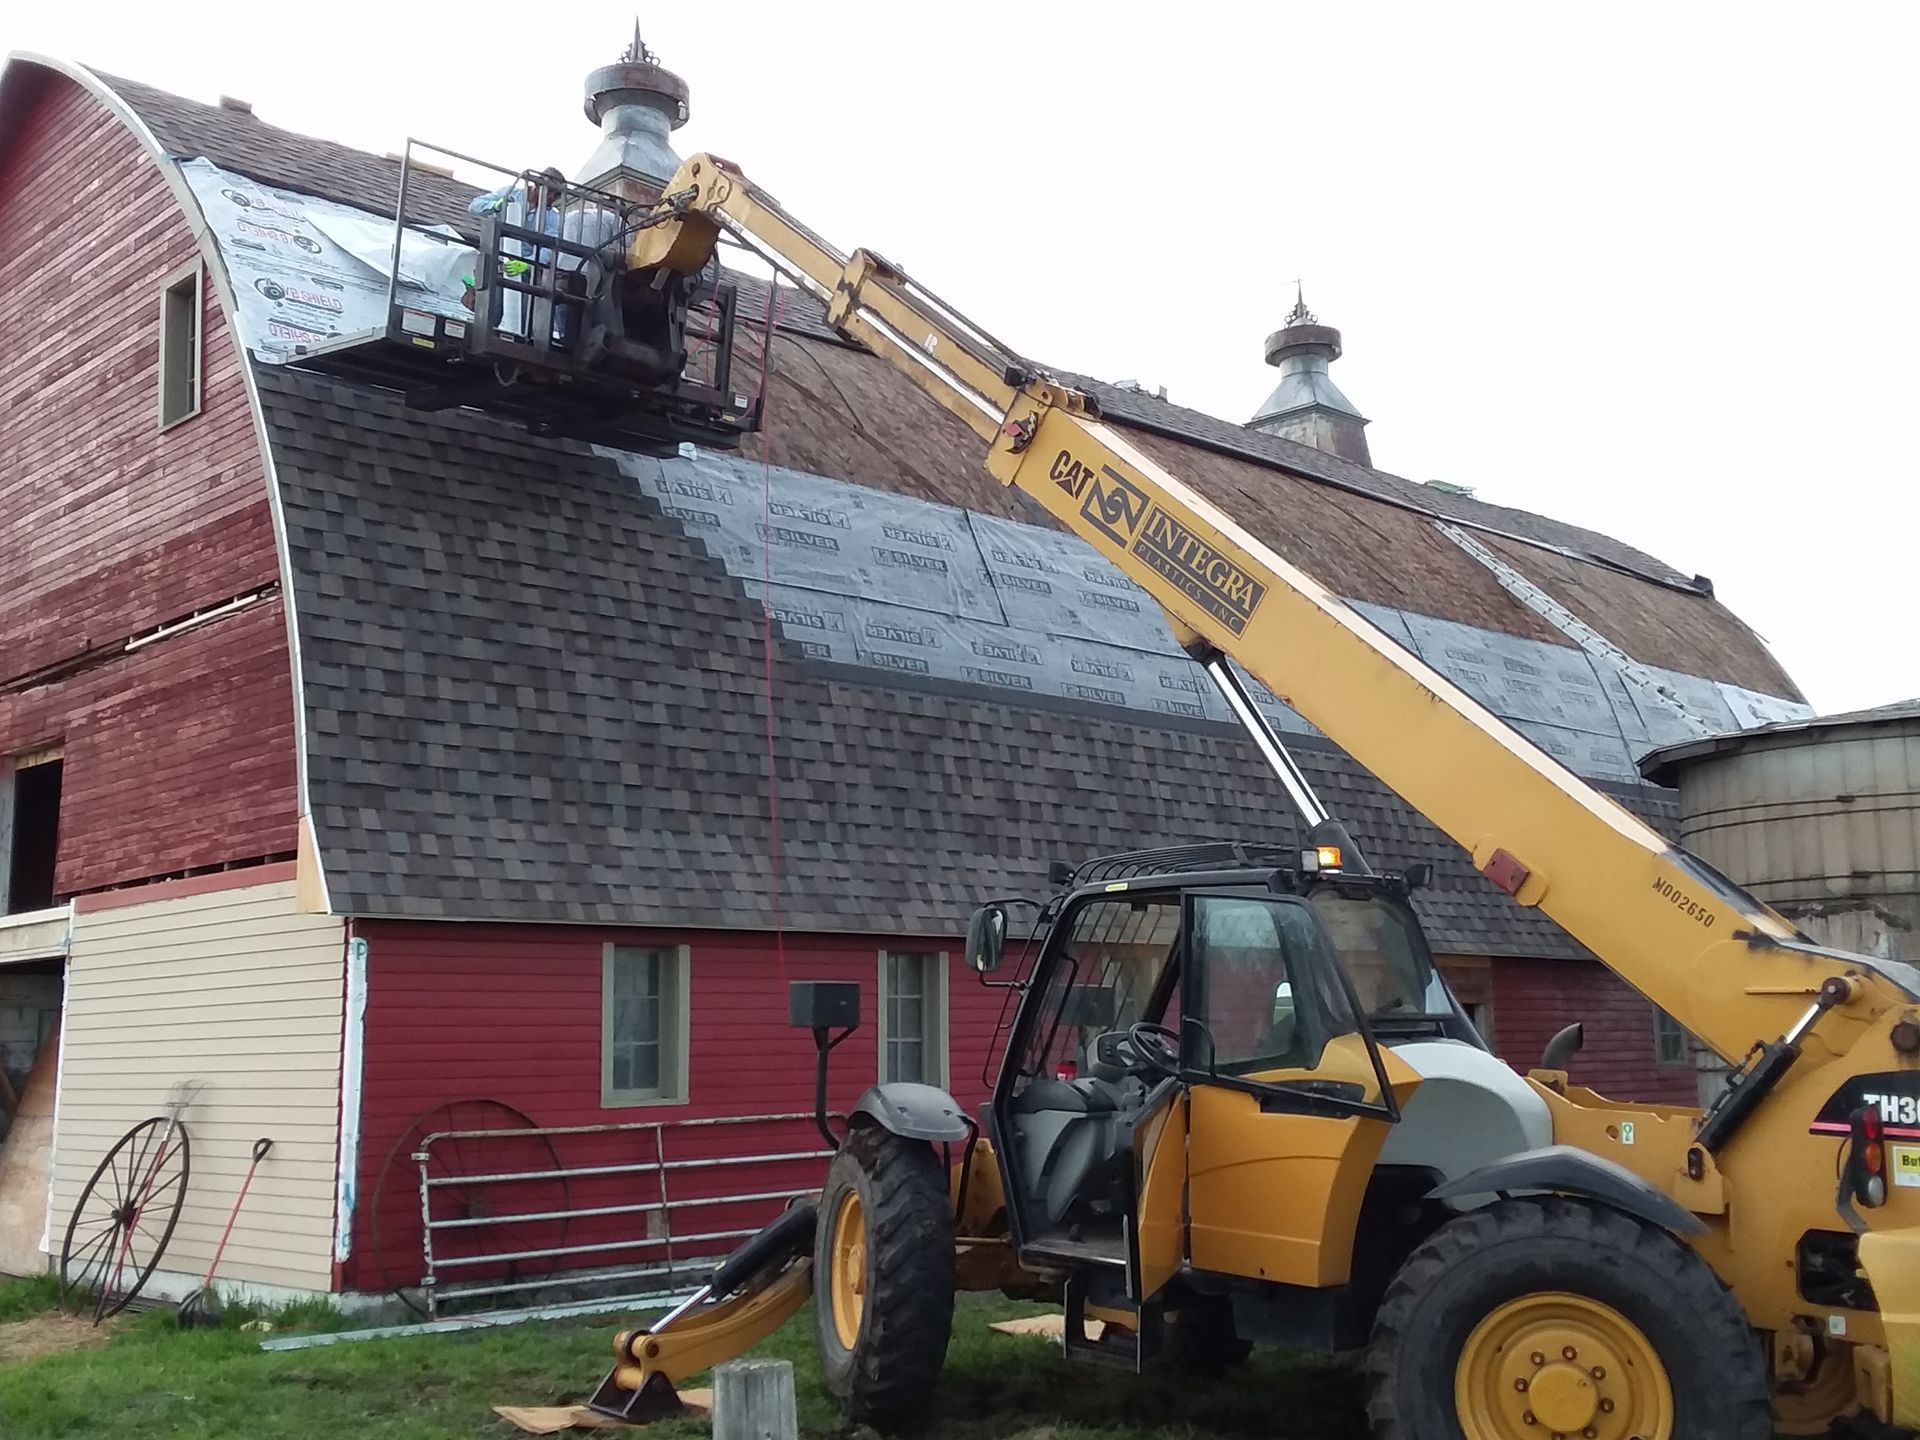 Laminate Shingles being installed on a curved barn using a Telehandler near Fargo-ND and Moorhead-MN